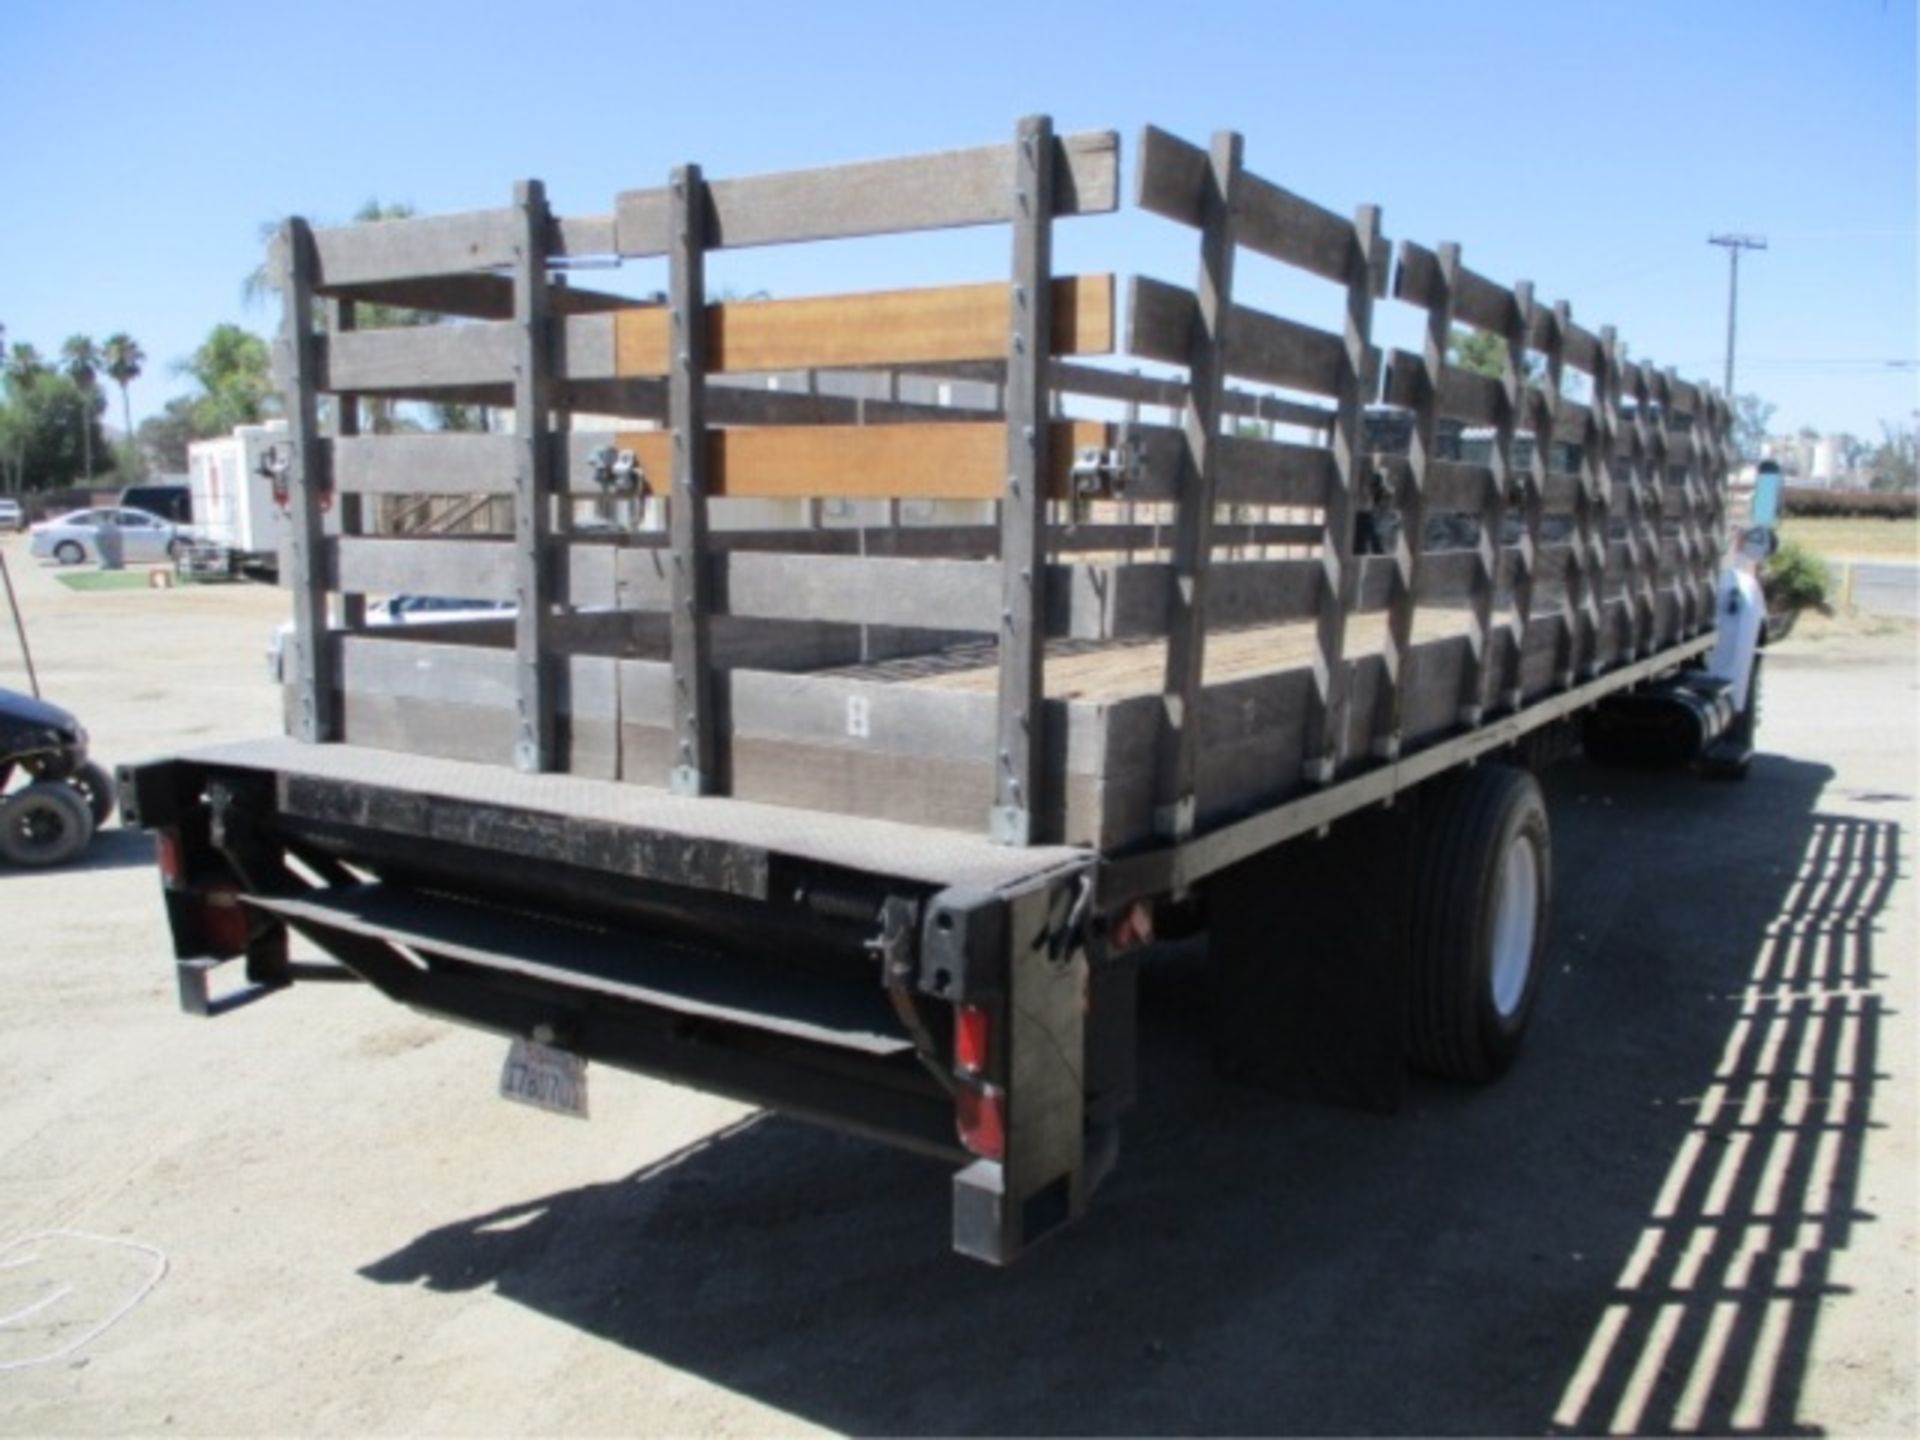 2005 Ford F650 S/A Flatbed Stakebed Truck, Cat C7 Acert 7.2L 6-Cyl Diesel, Automatic, Lift Gate, 24' - Image 17 of 61